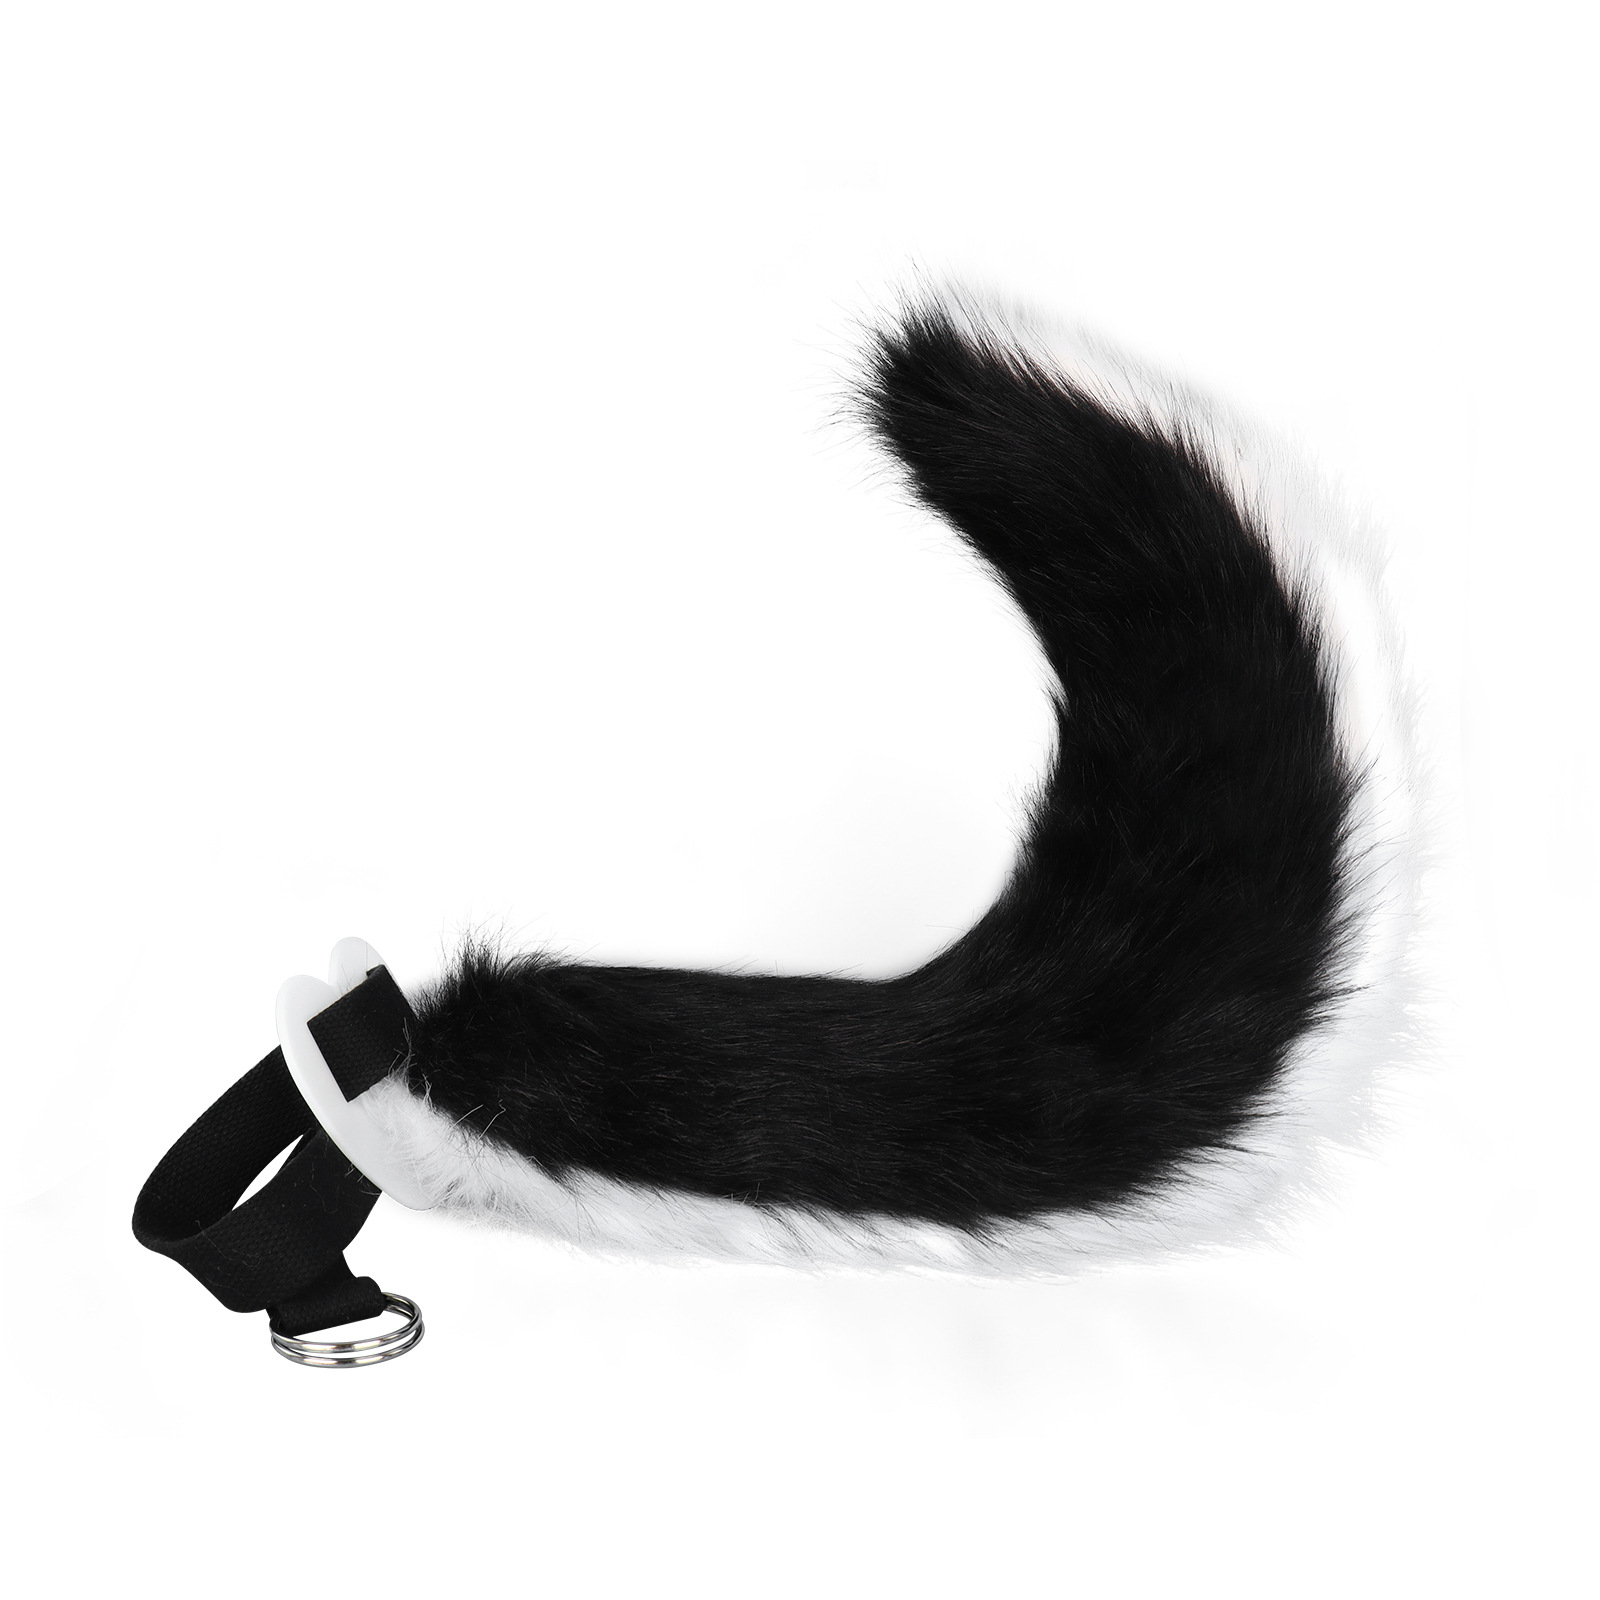 Tail - black and white